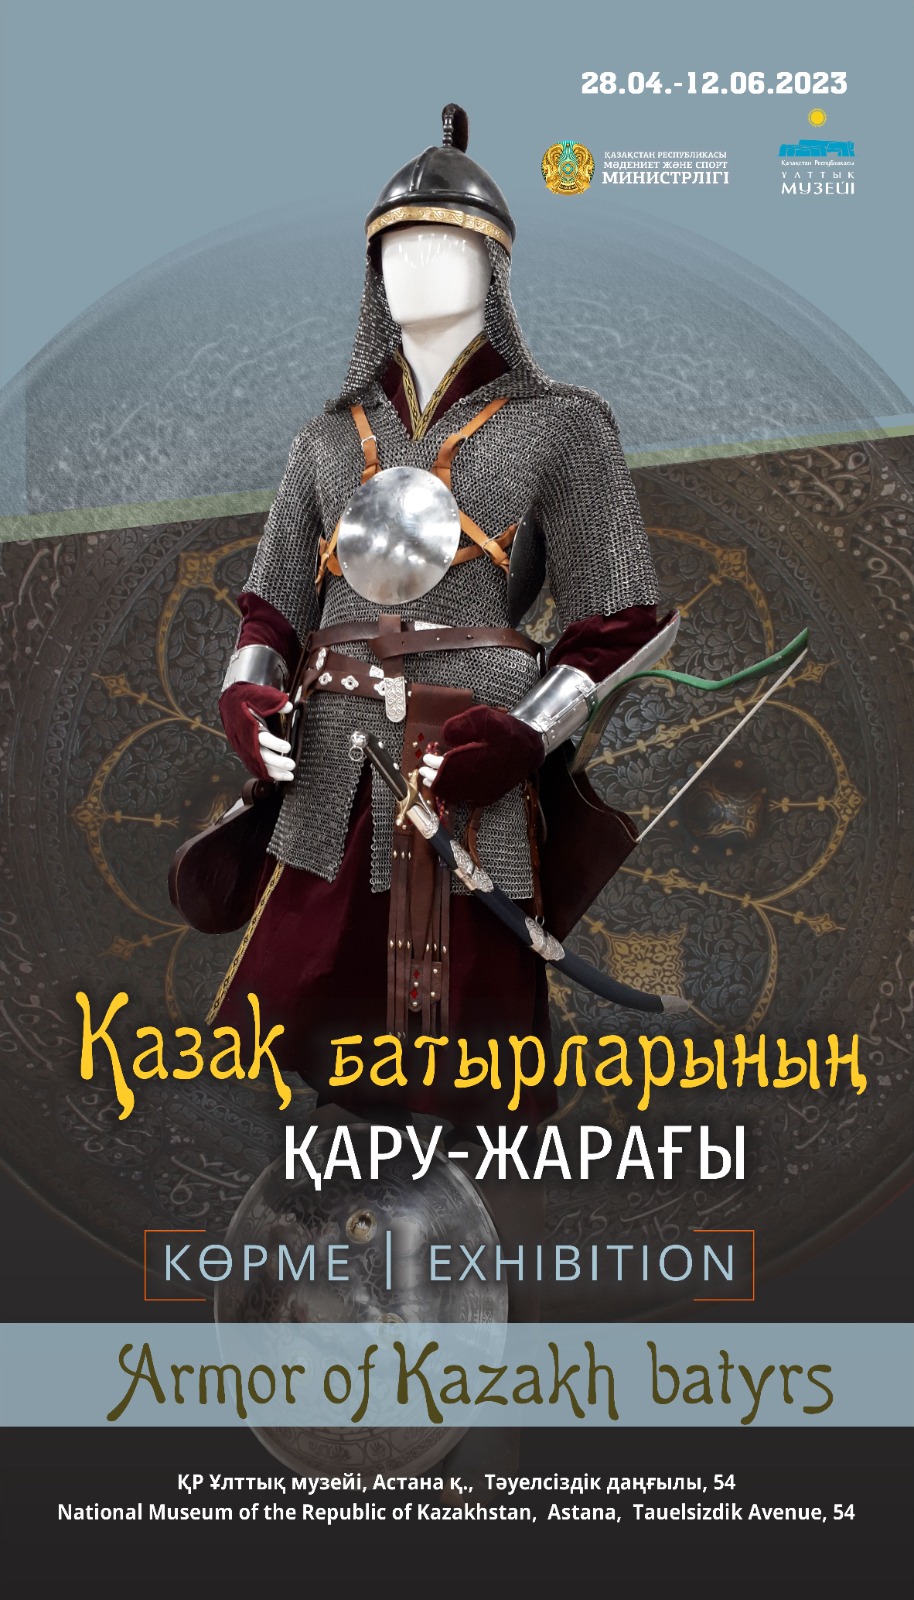 "Armor of Kazakh batyrs" exhibition by K. Akhmetzhan will open in the National Museum of the Republic of Kazakhstan